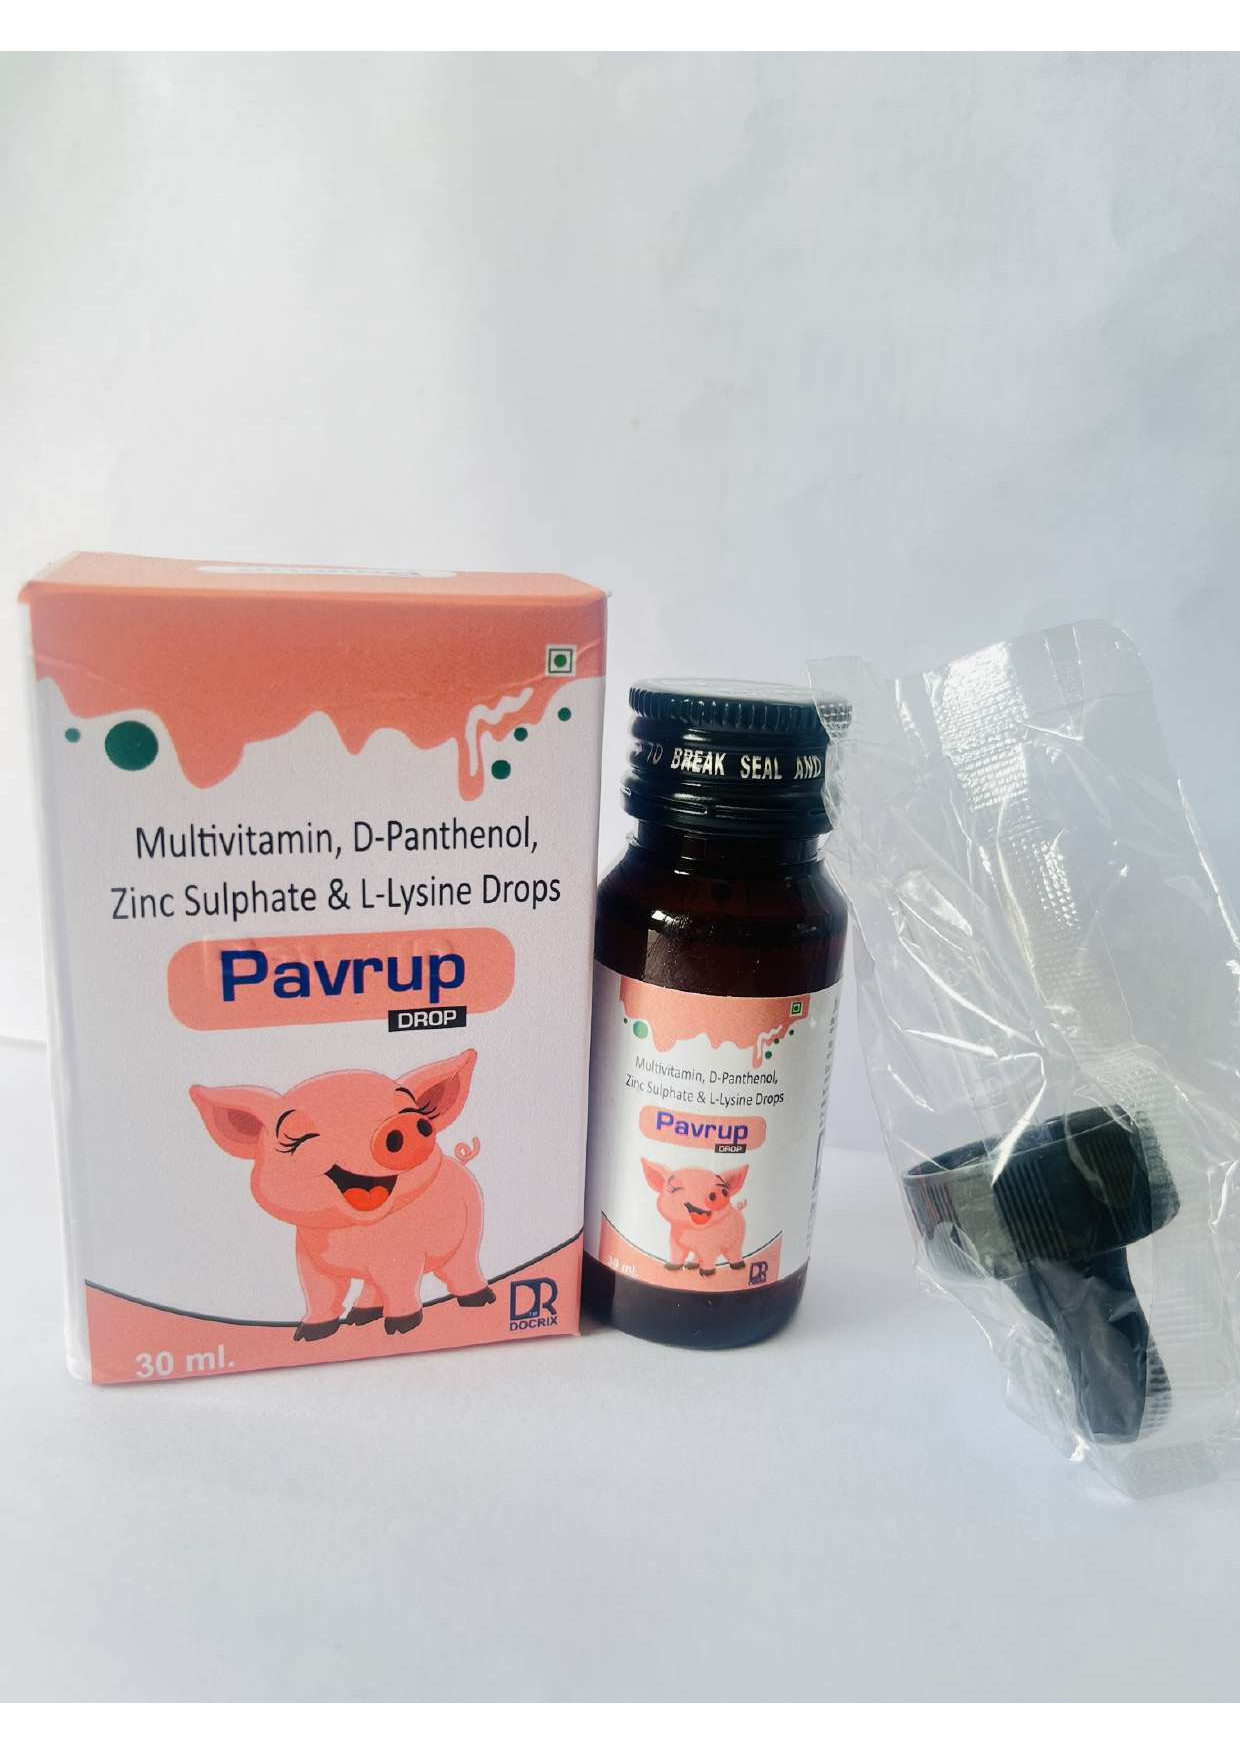 Product Name: Pavrup, Compositions of Pavrup are Multivitamin D-Panthenol Zine Sulphate & L-Lysine Drops - Docrix Healthcare